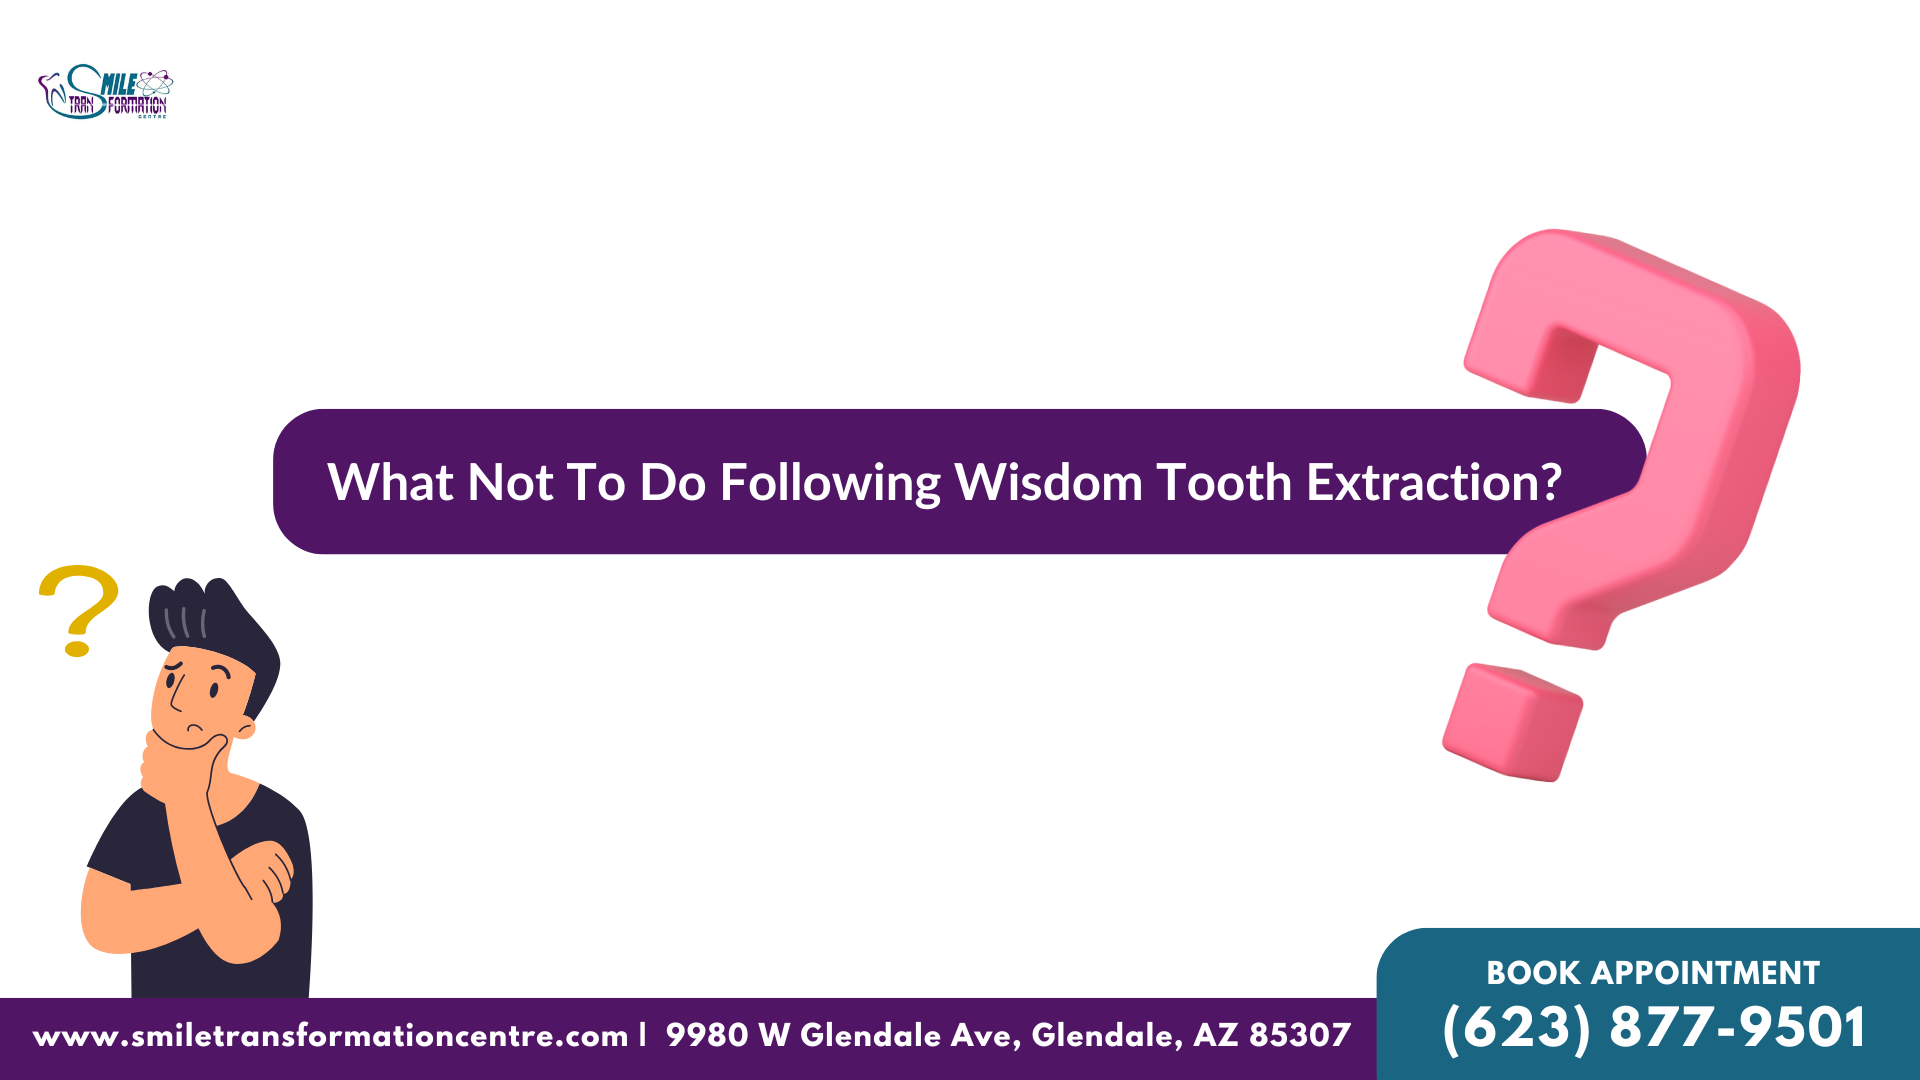 What Not To Do Following Wisdom Tooth Extraction